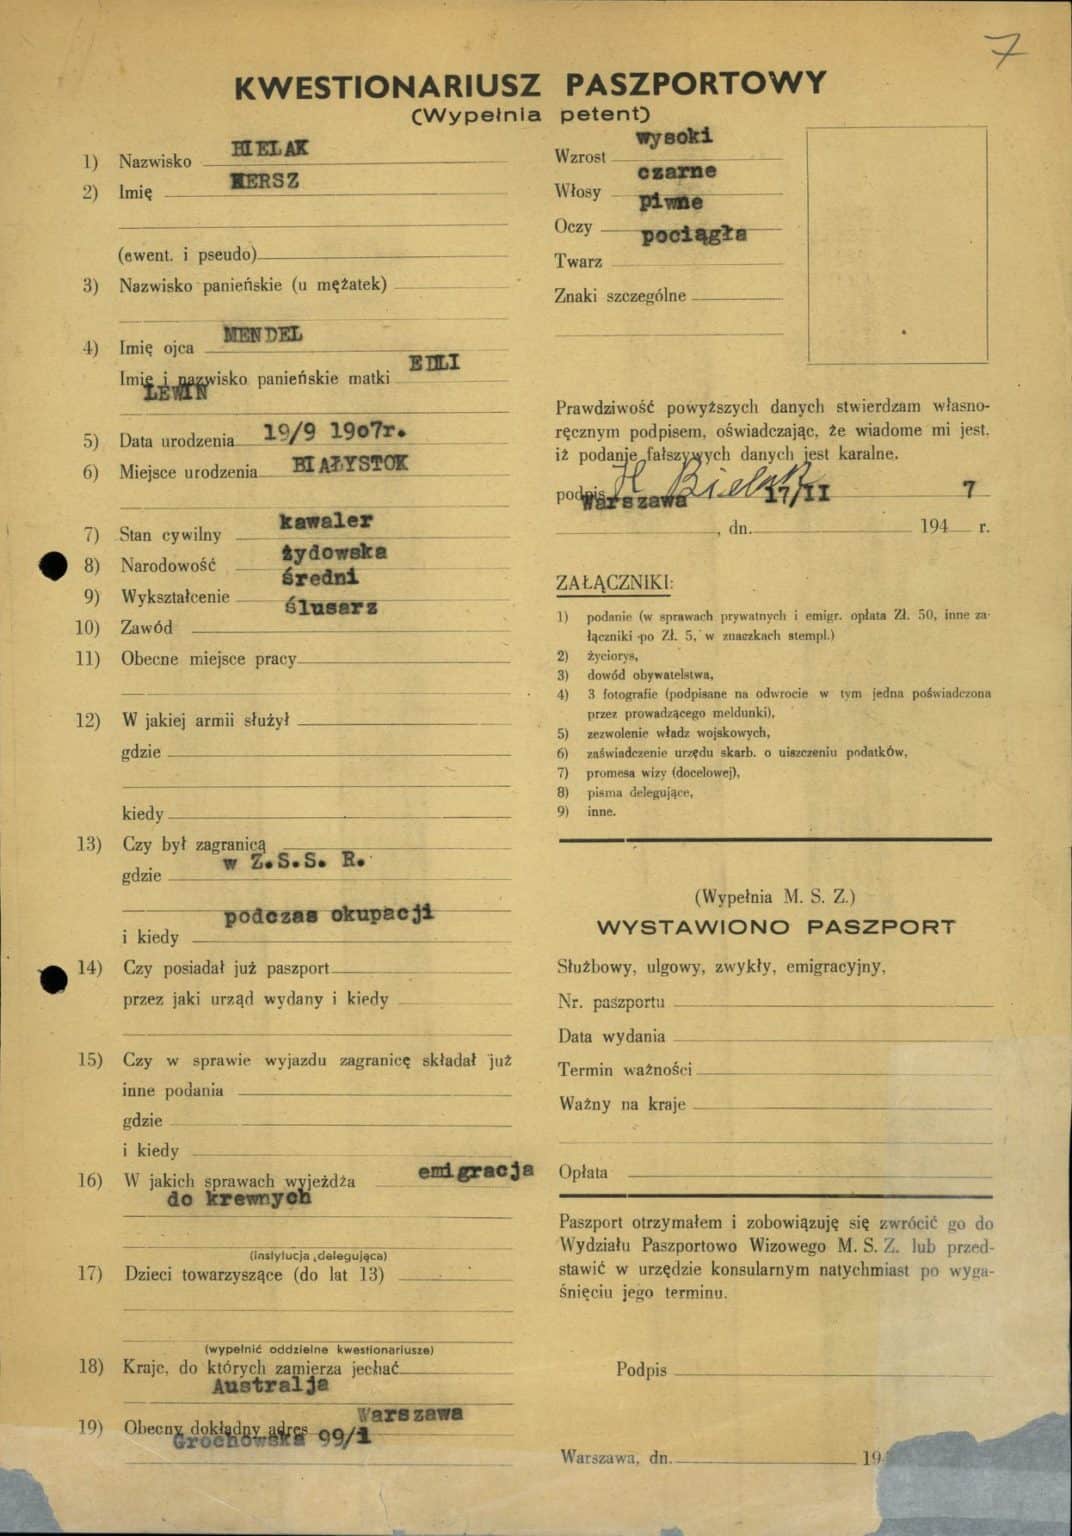 passport questionnaire for a Jewish-Polish citizen from the year 1947